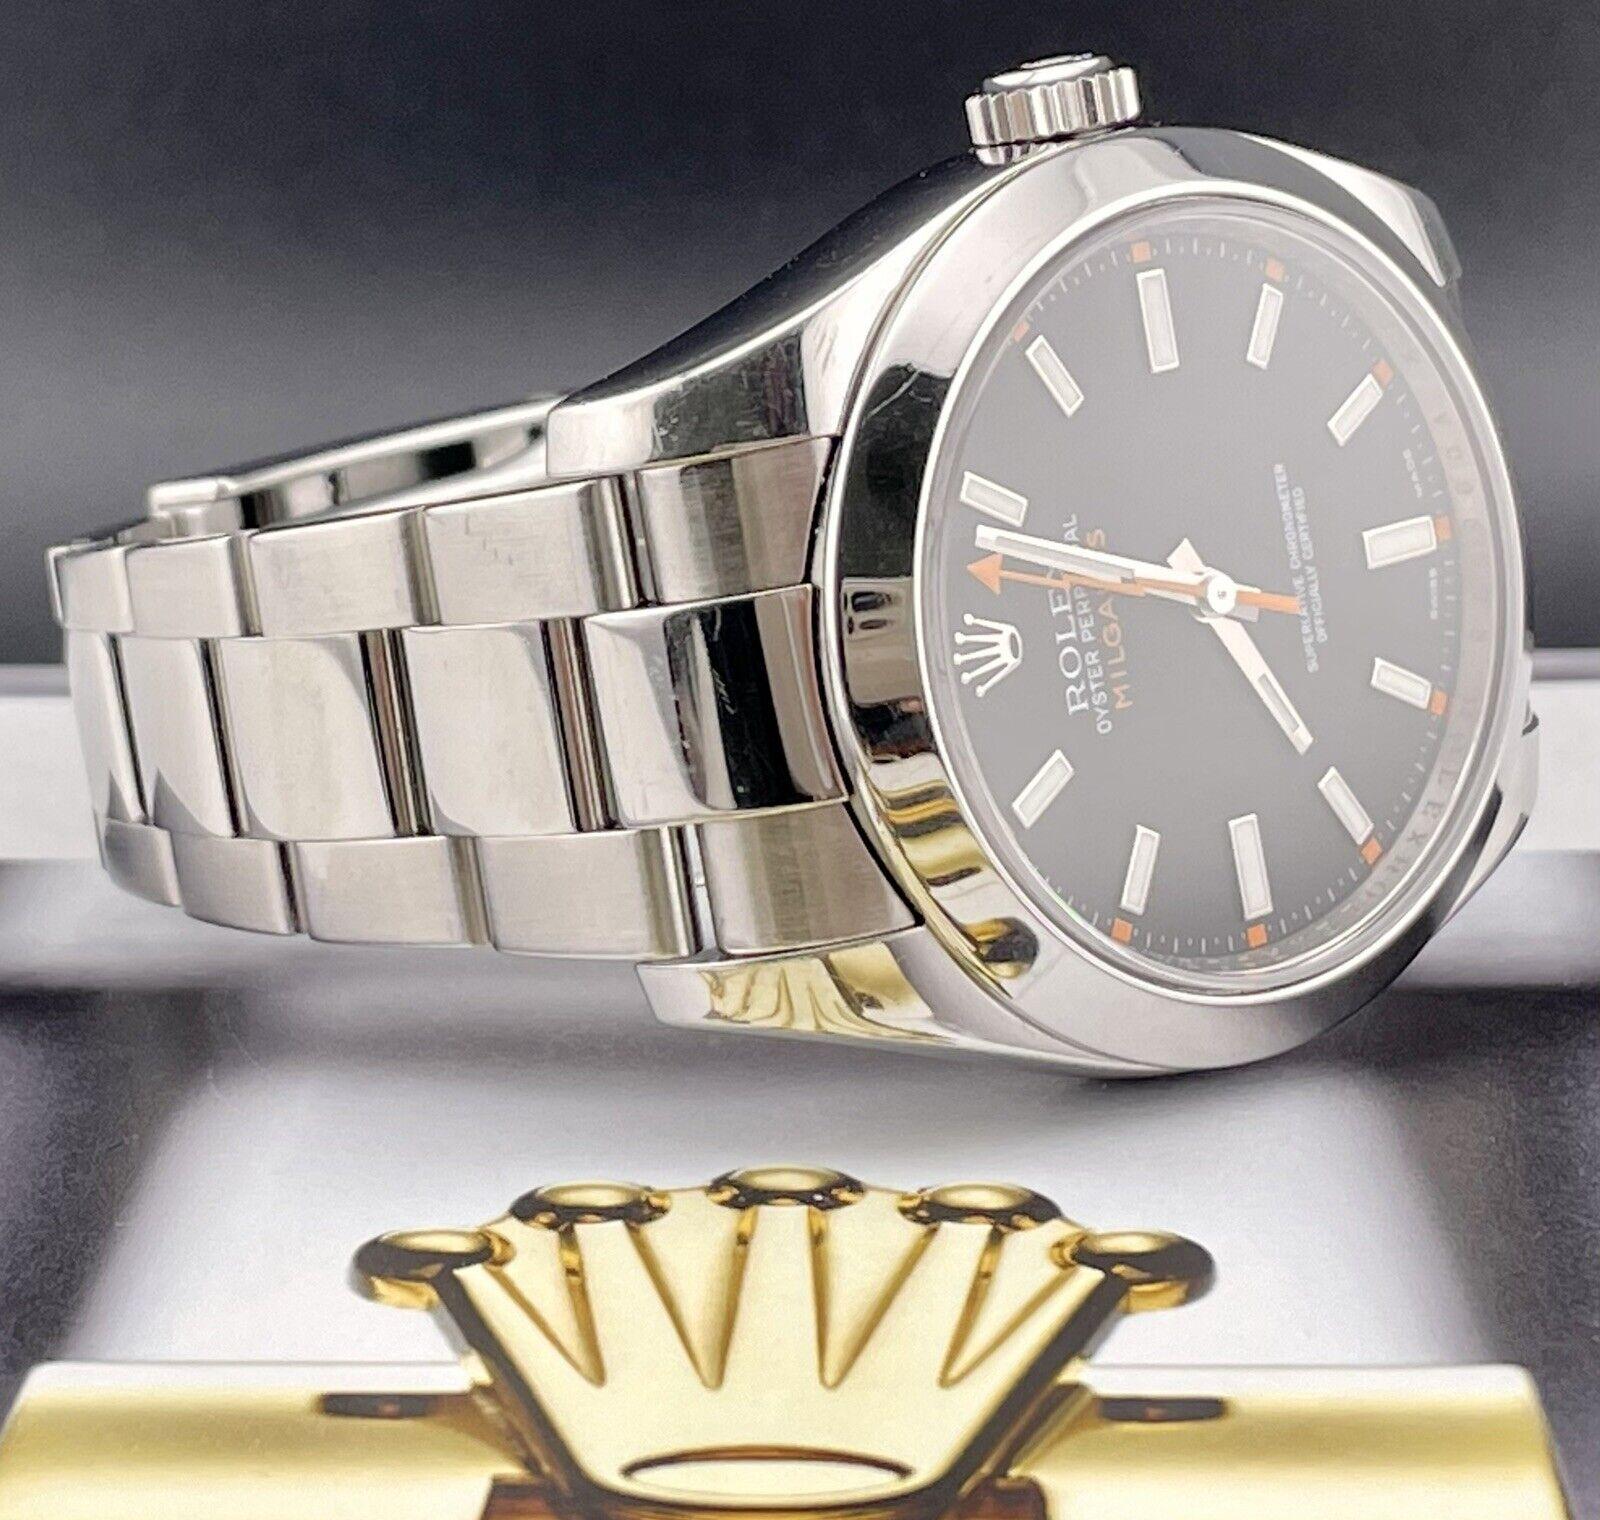 Rolex Oyster Perpetual Milgauss 40mm Watch. A Pre-owned watch w/ Gift Box. Watch is 100% Authentic and Comes with Authenticity Card. Watch Reference is 116400 and is in Good Condition (See Pictures, Needs Polish). The dial color is Black and